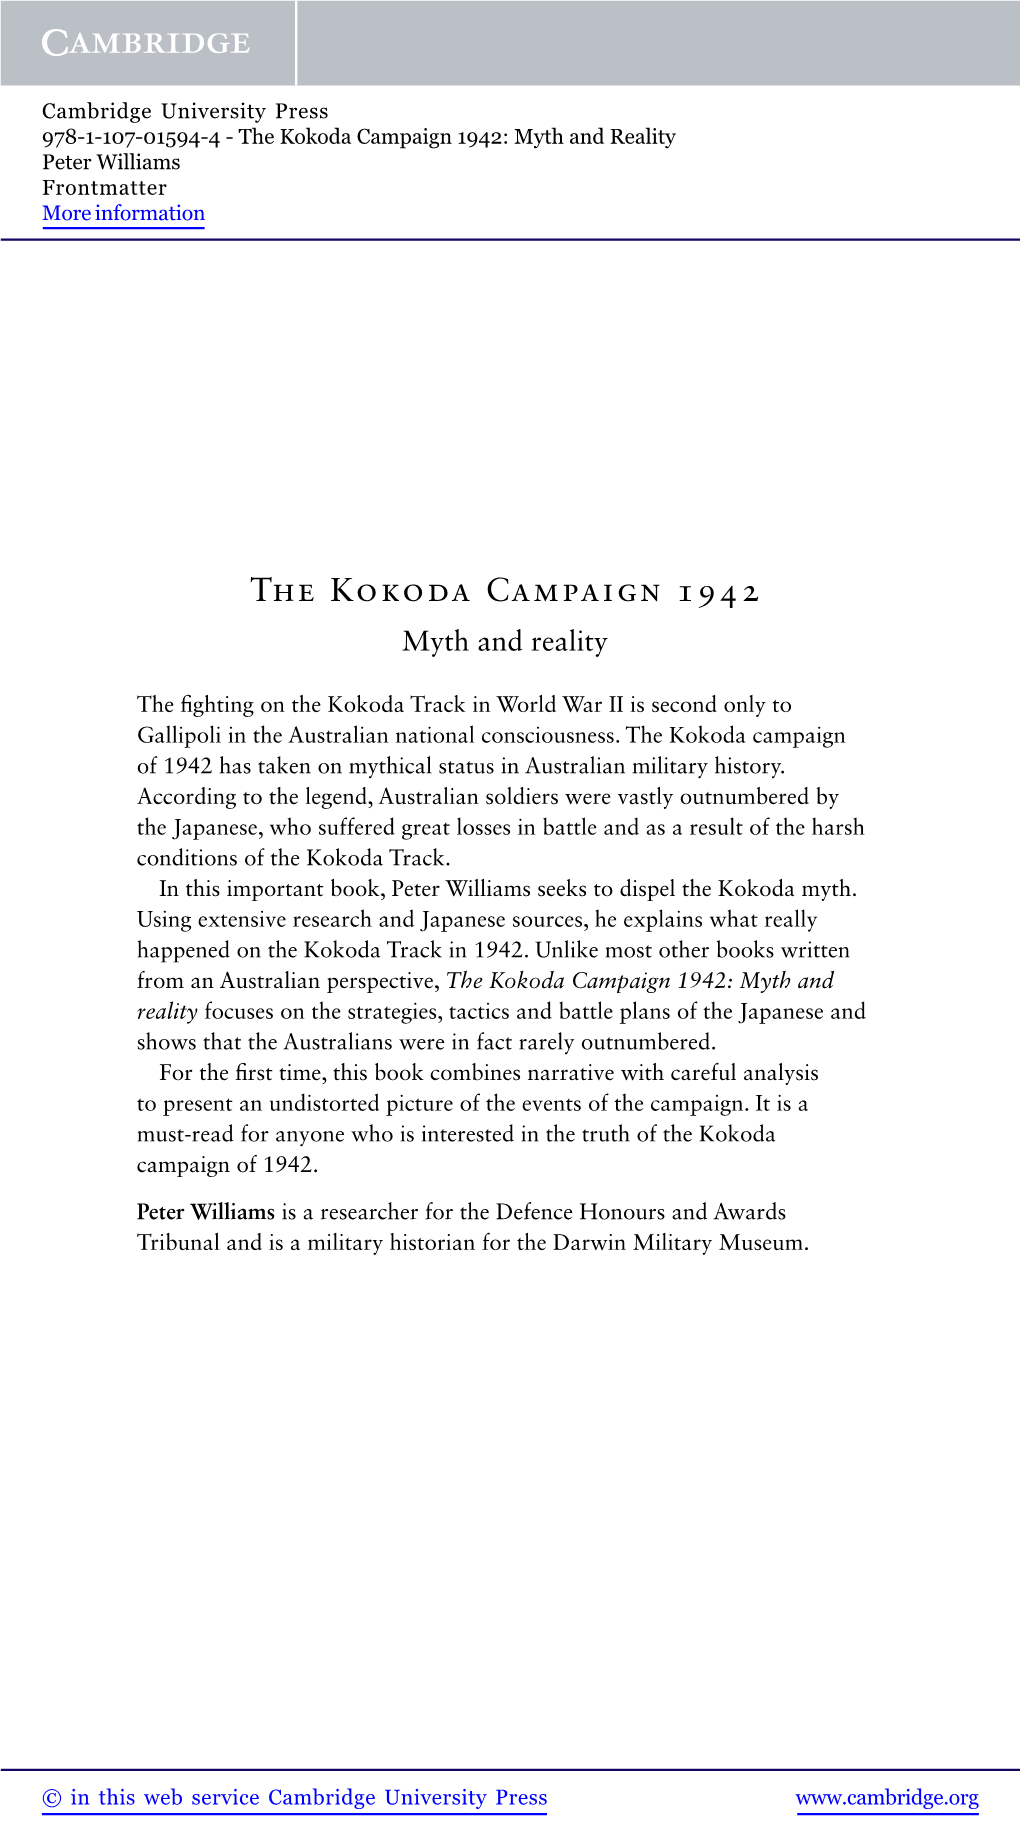 The Kokoda Campaign 1942: Myth and Reality Peter Williams Frontmatter More Information